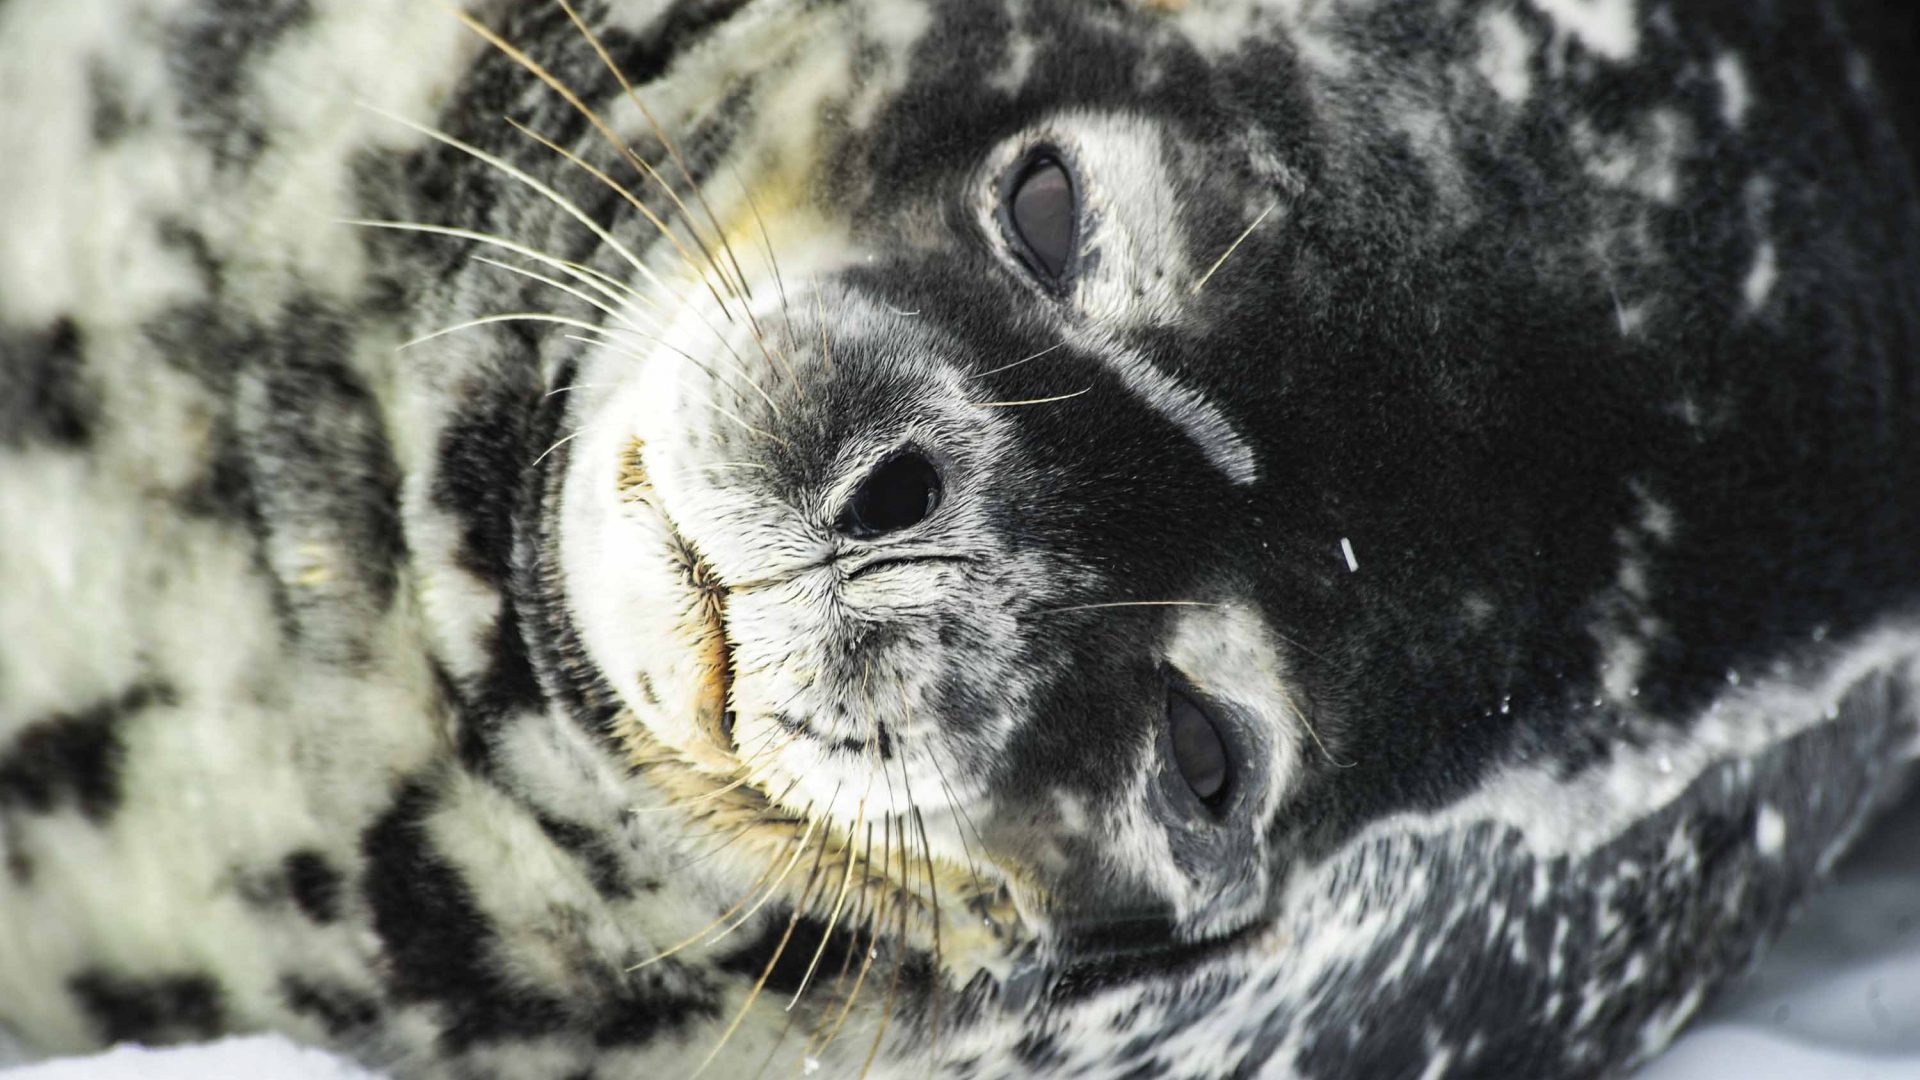 A close up of a Weddell seal.